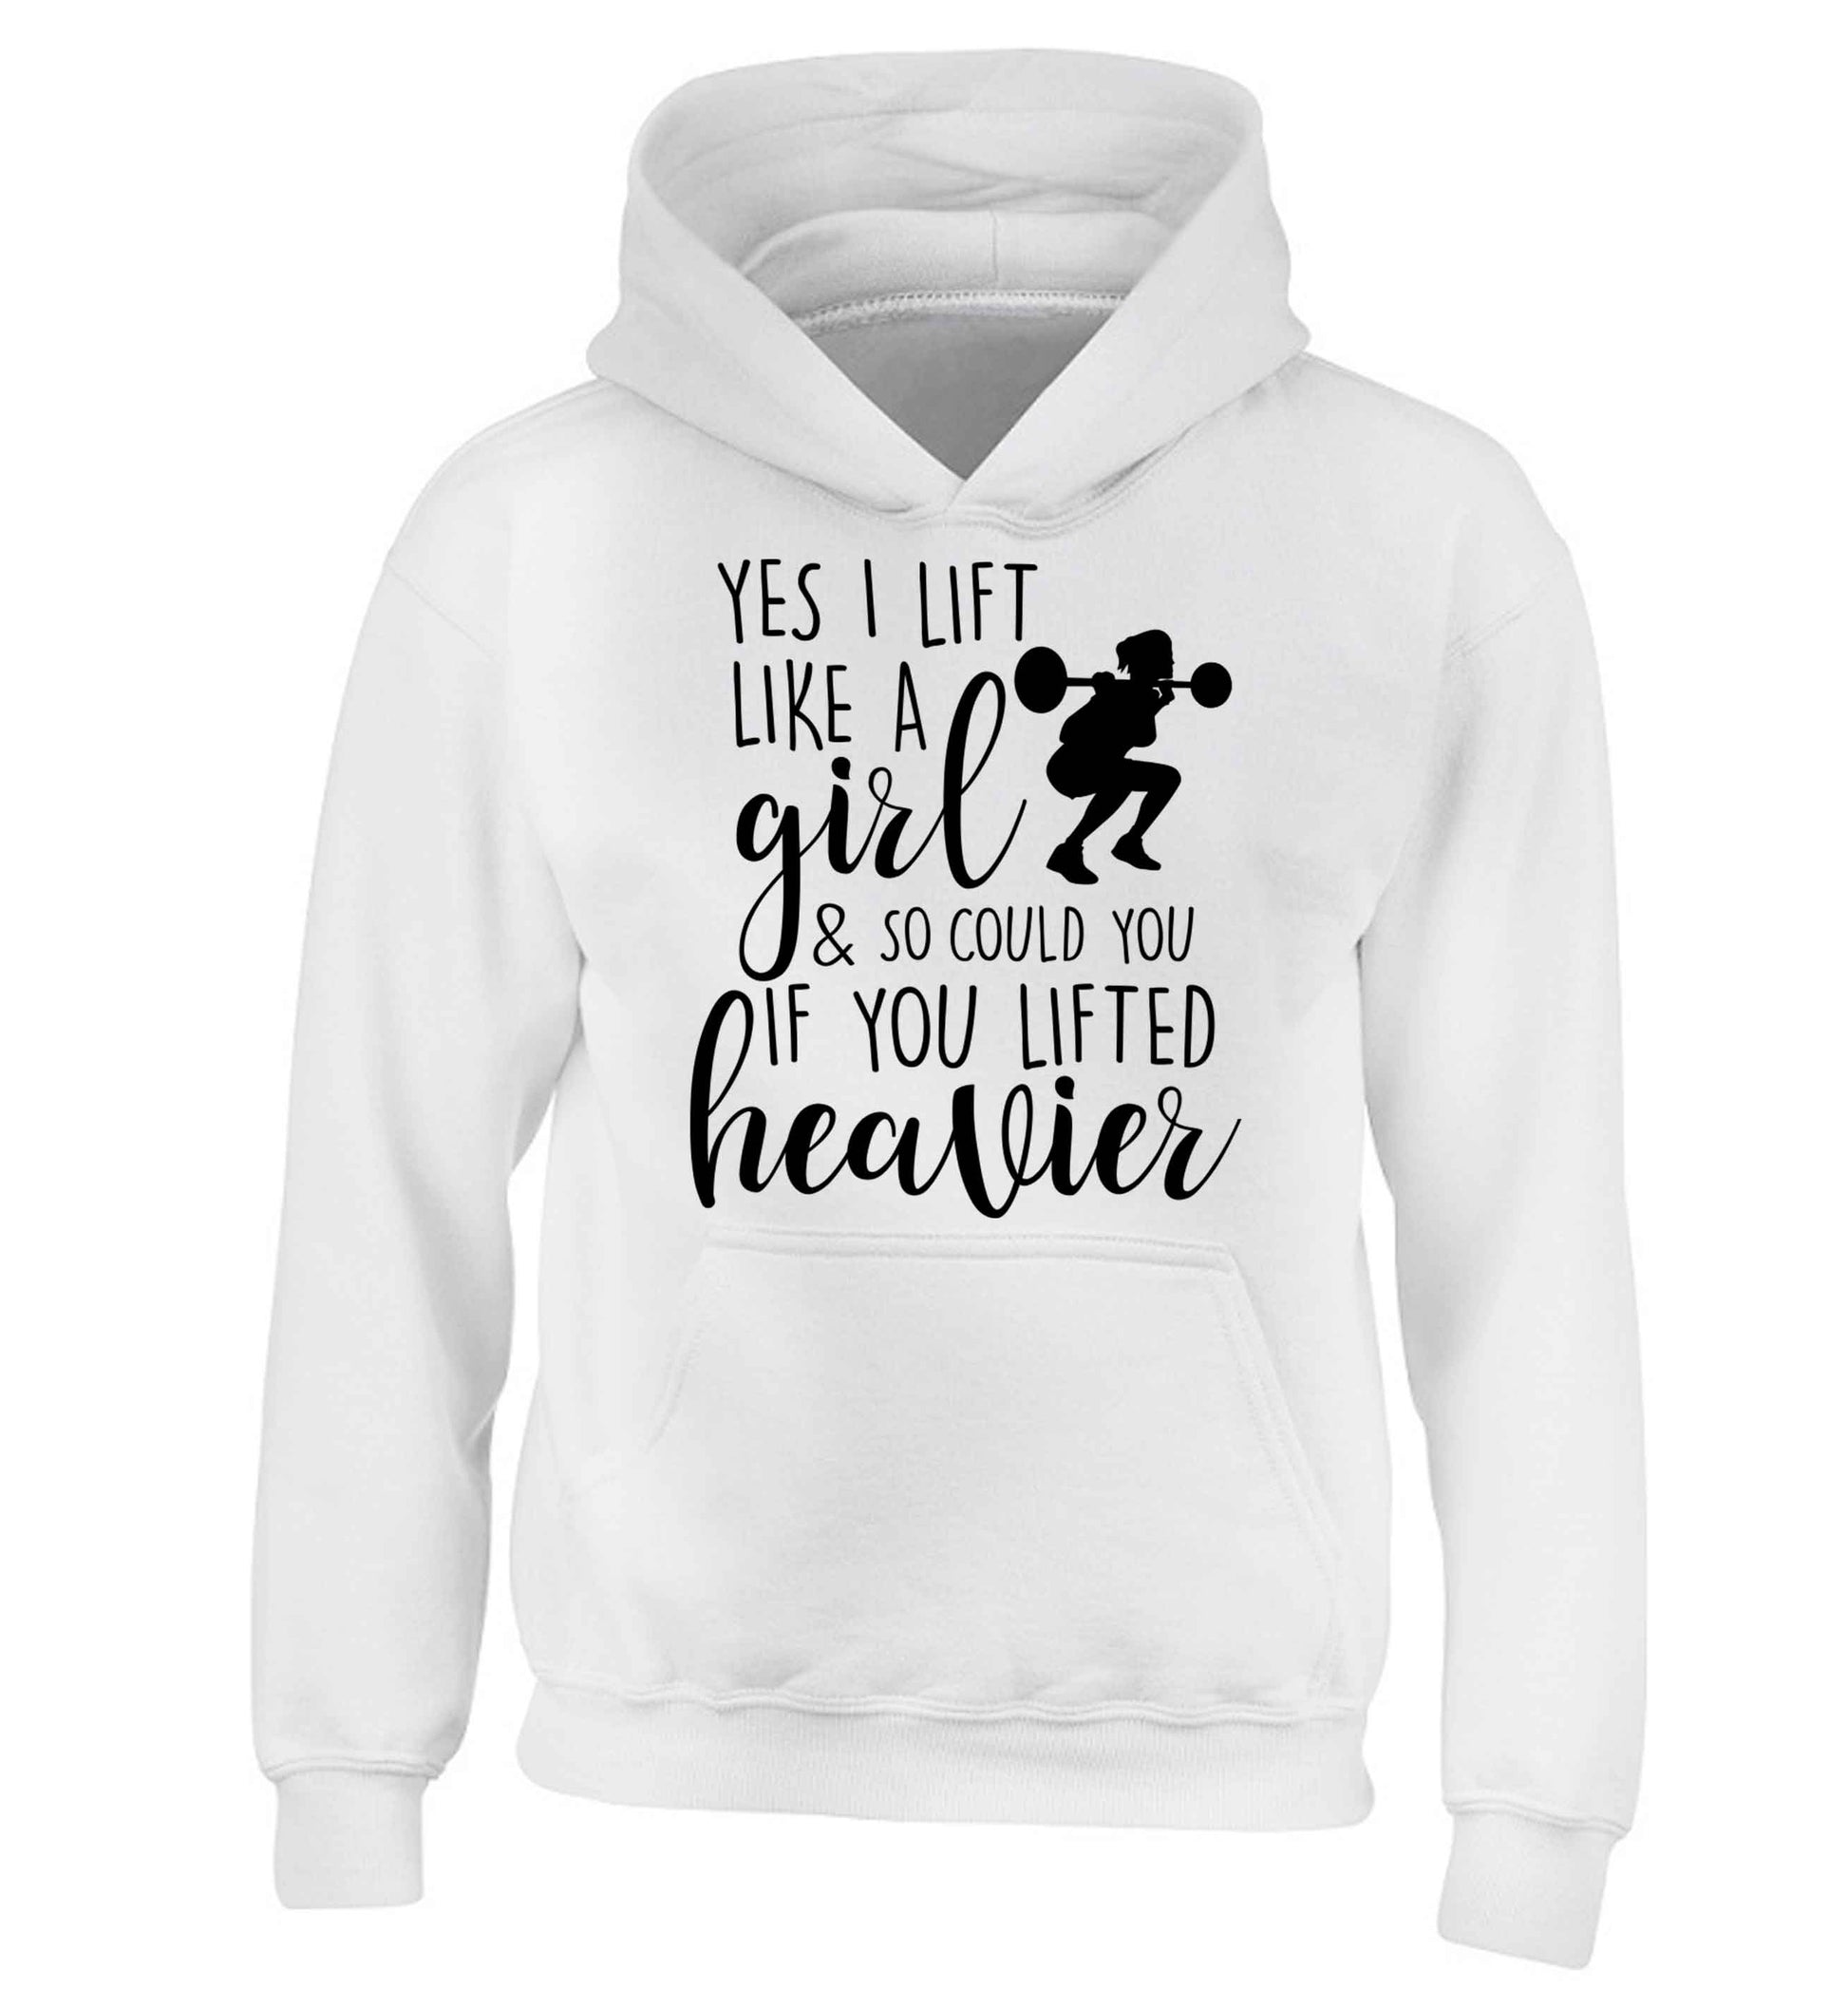 Yes I lift like a girl and so could you if you lifted heavier children's white hoodie 12-13 Years